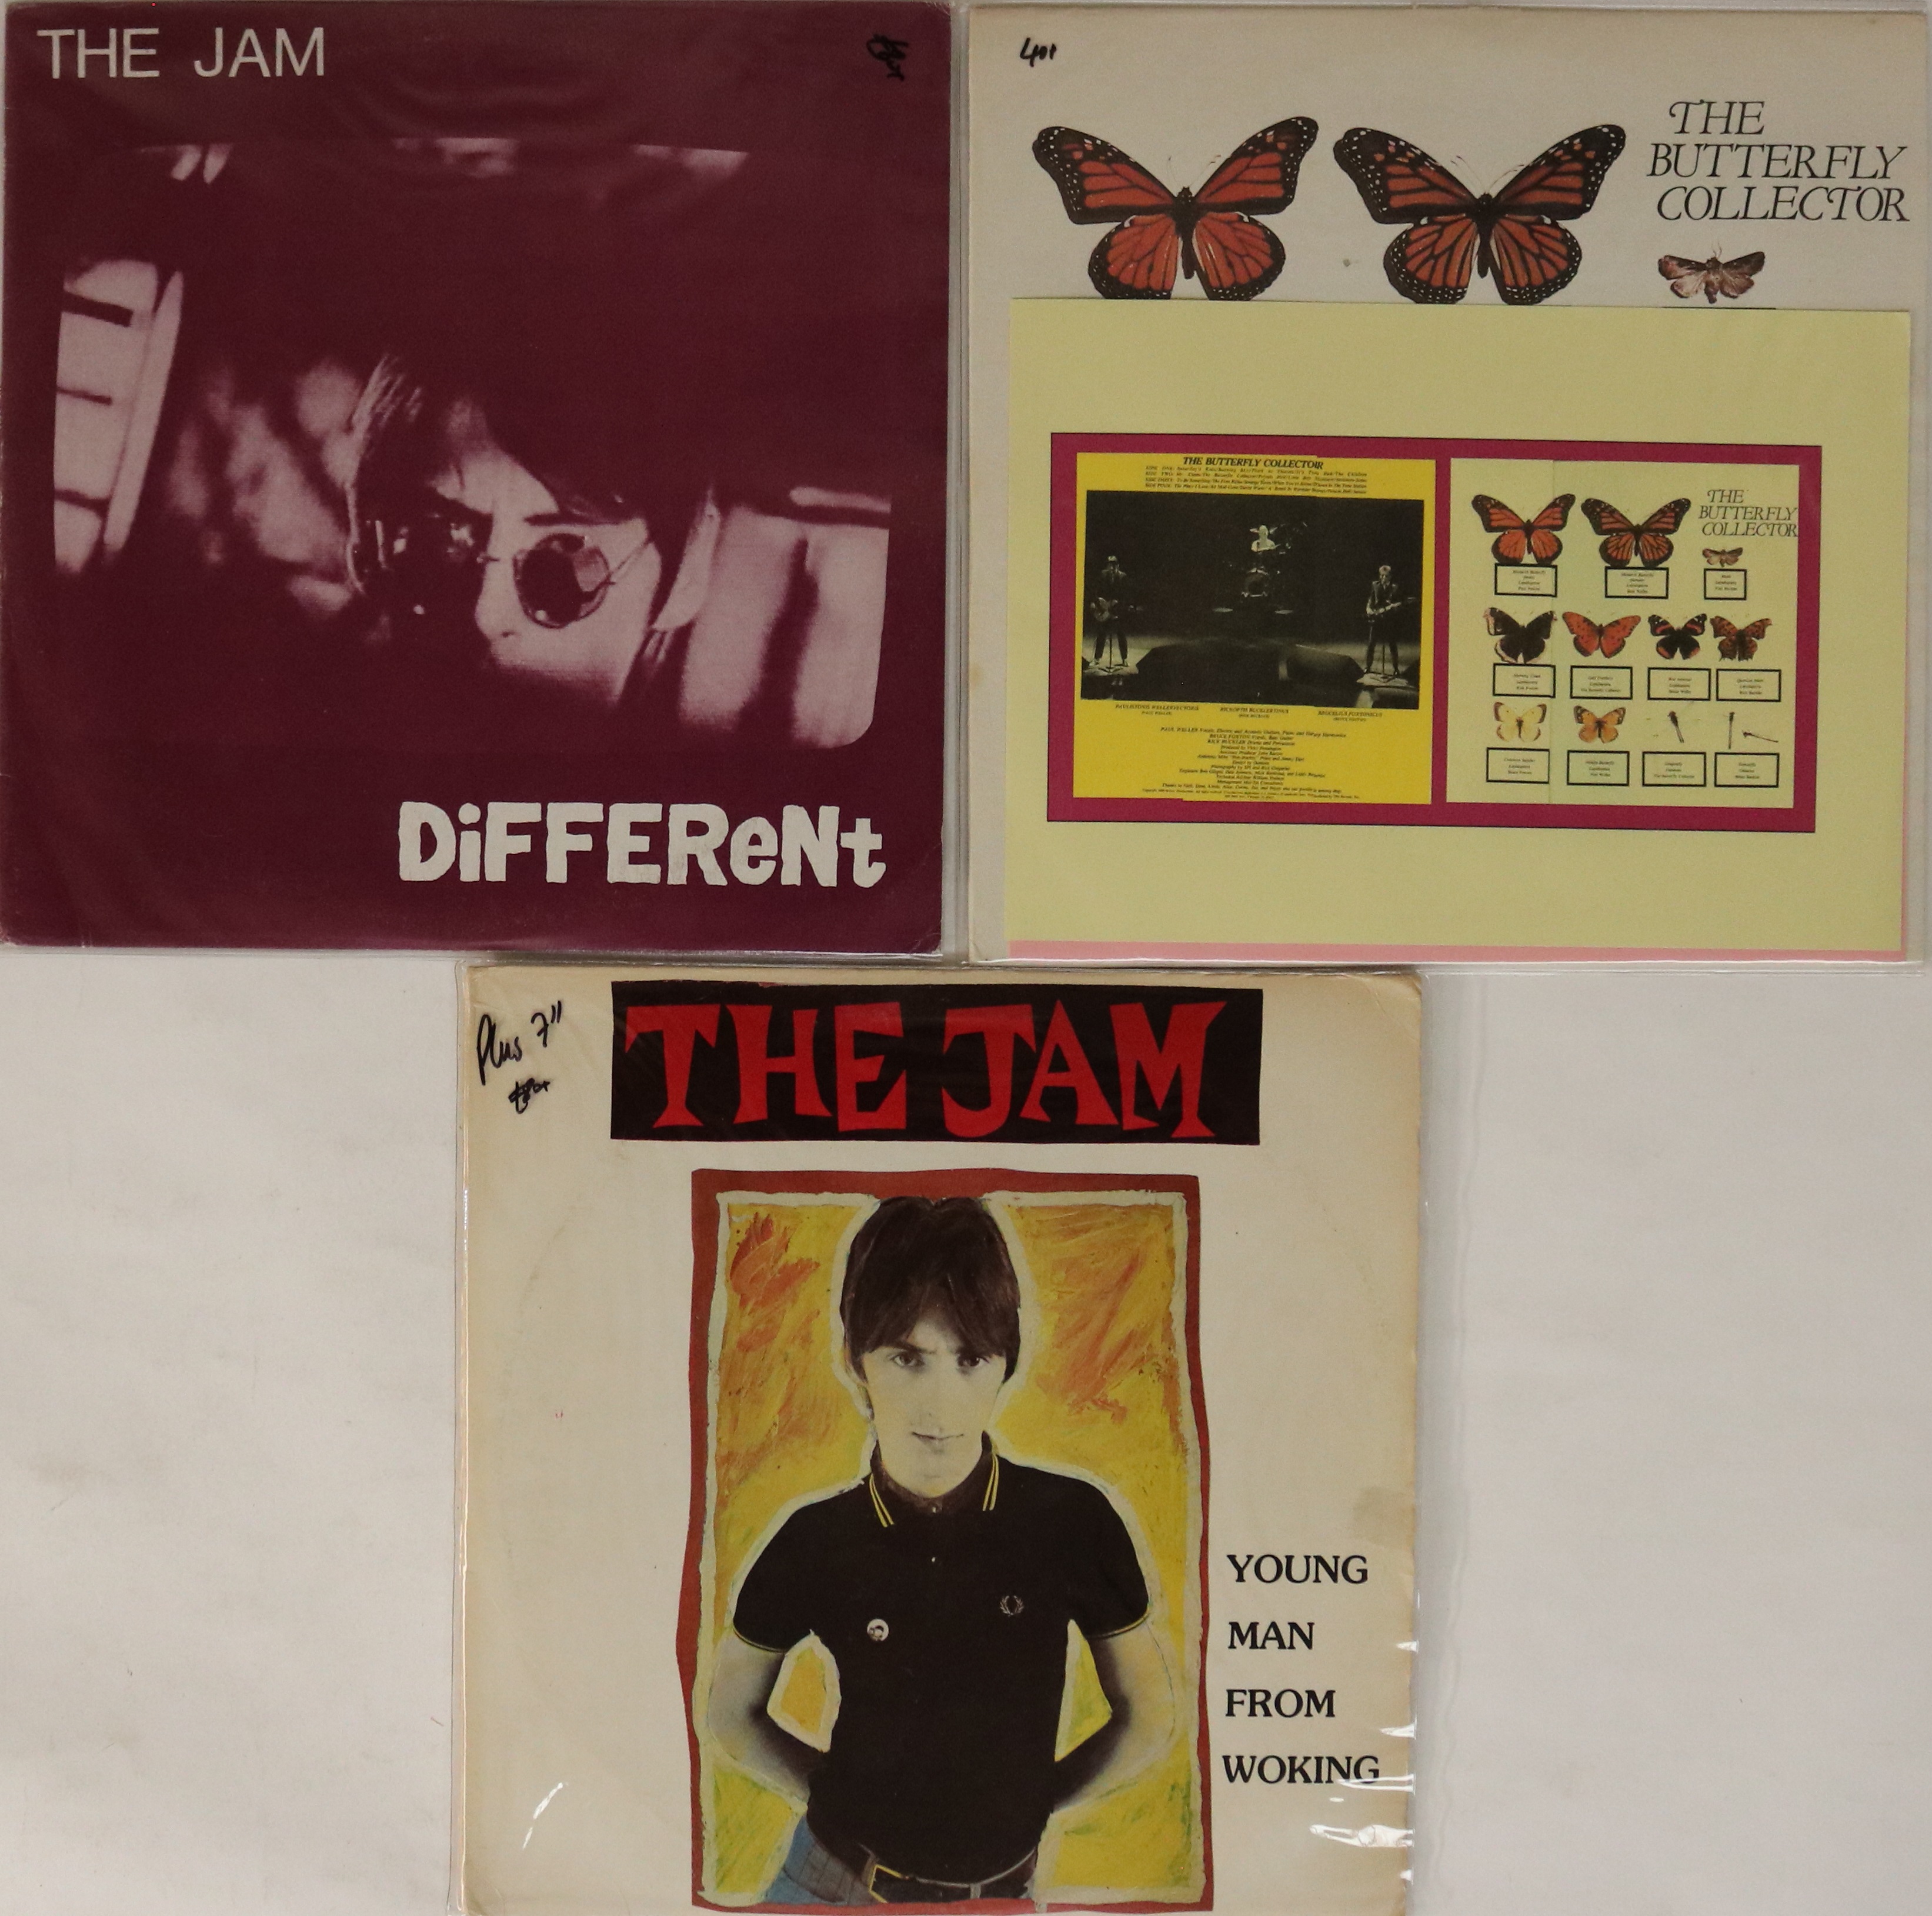 THE JAM / PRIVATE RELEASES - LPs/7". Killer selection of 3 x LPs plus 1 x 7".